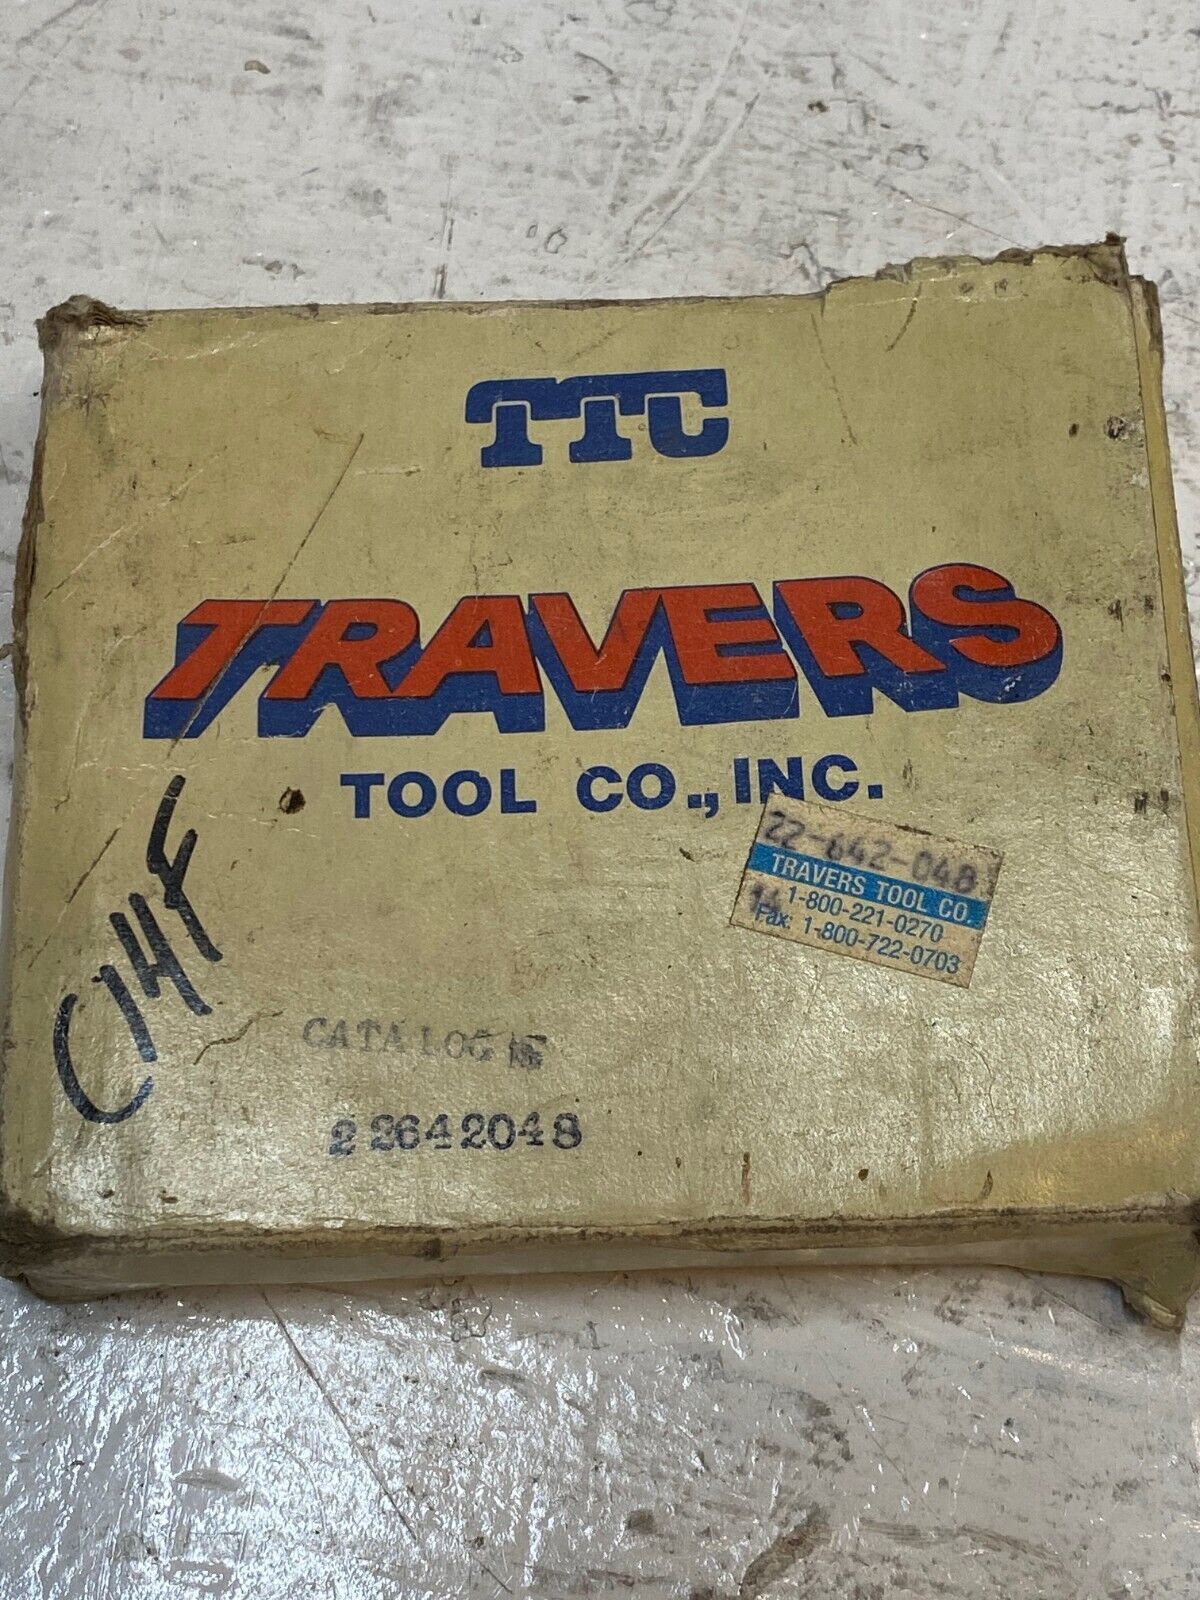 Primary image for 5 Pcs of TTC Travers Tool Co 22642048 Carbide Brand Style C12 Grade C6